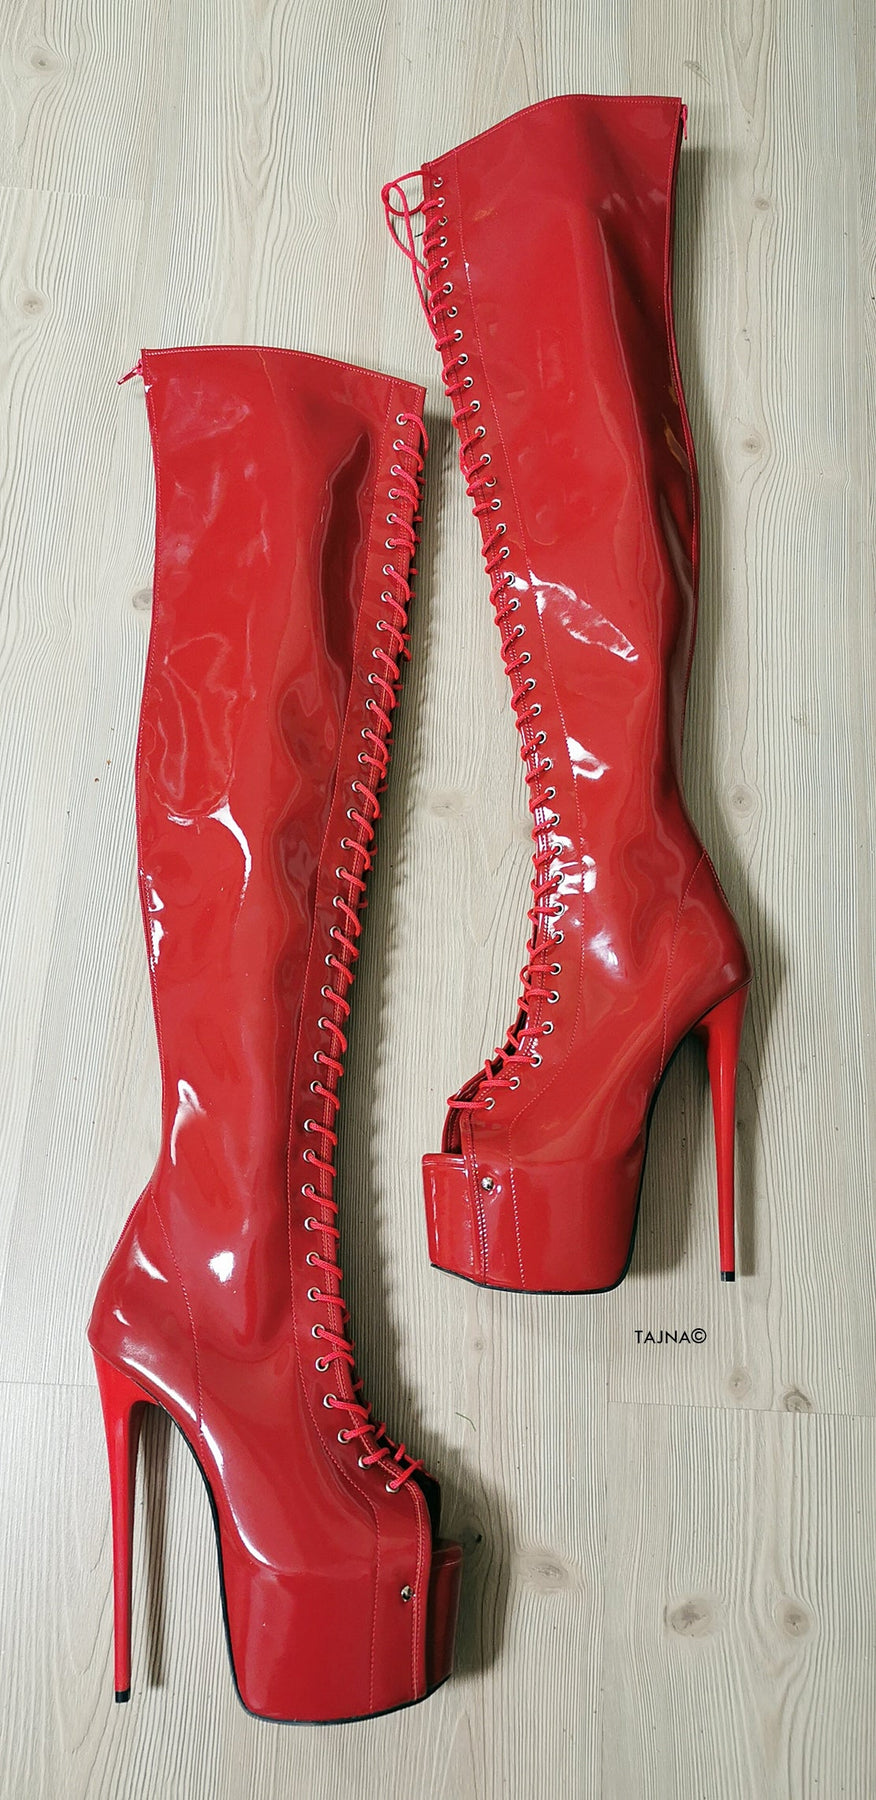 Red Patent Gladiator Lace Up Thigh High Boots | Tajna Shoes